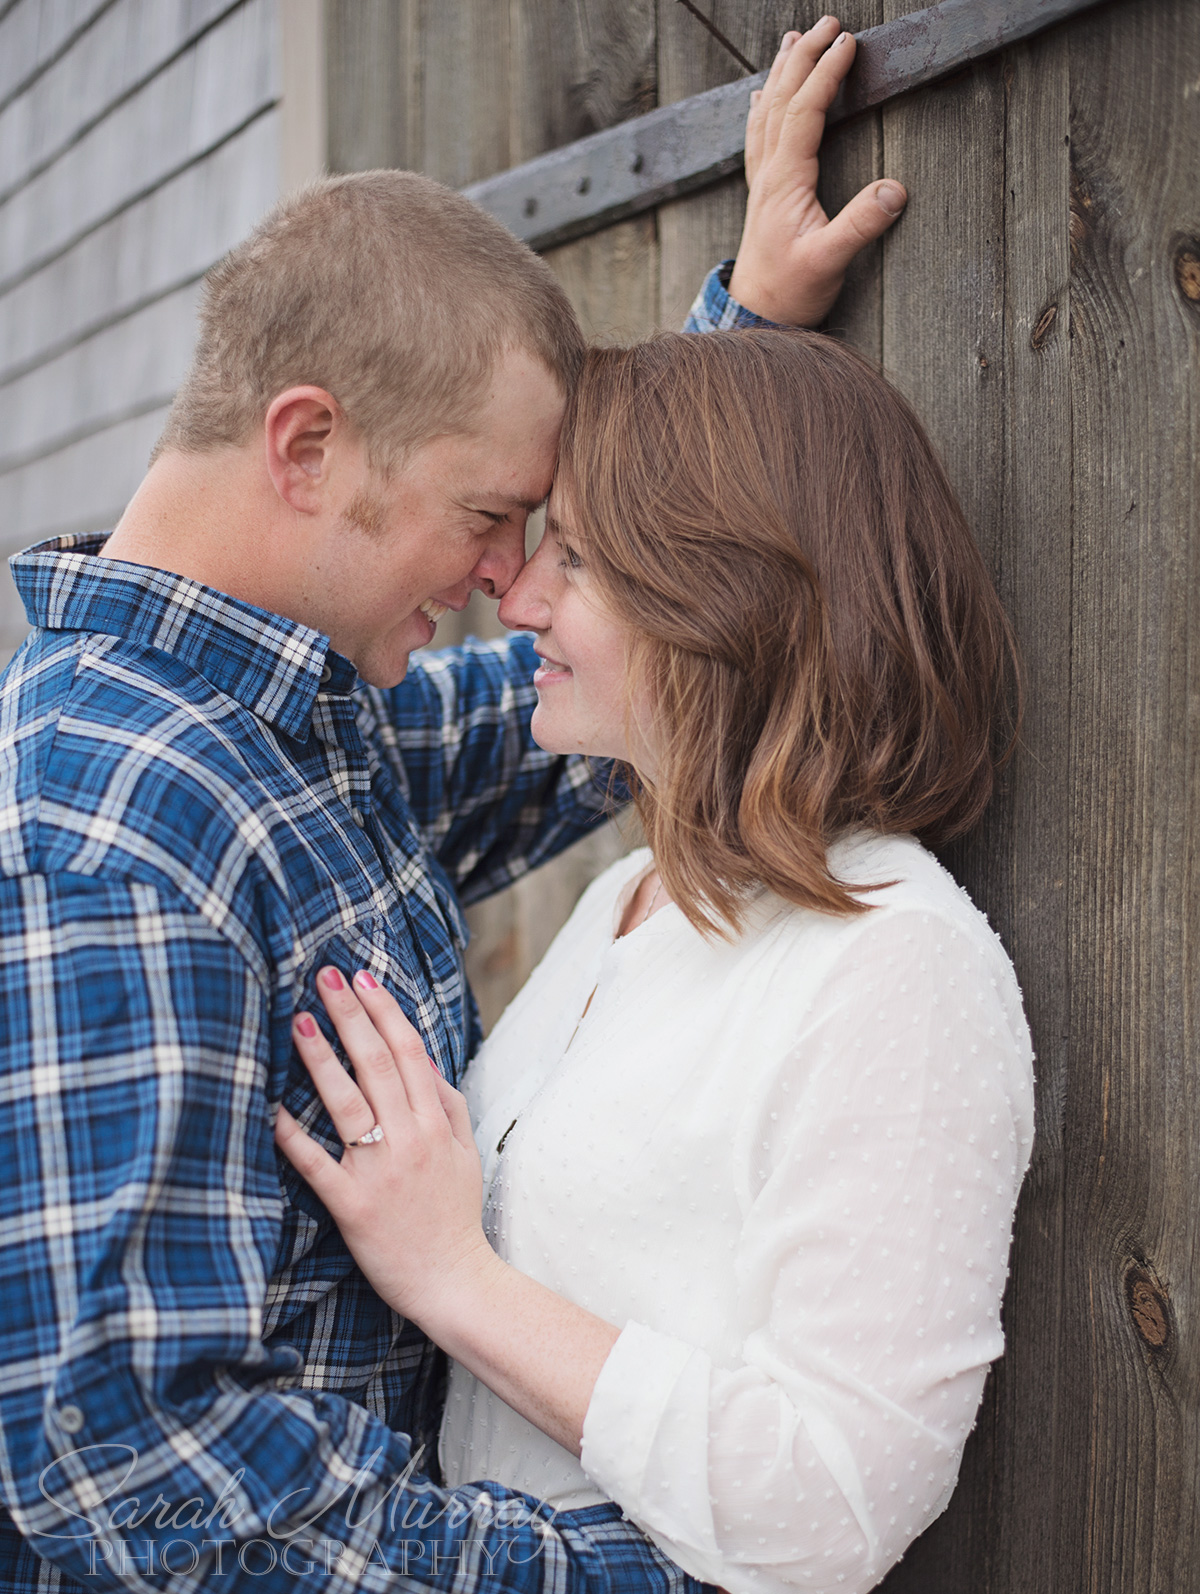 Bourne Farm Cape Cod Engagement Session in West Falmouth, Massachusetts - Sarah Murray Photography